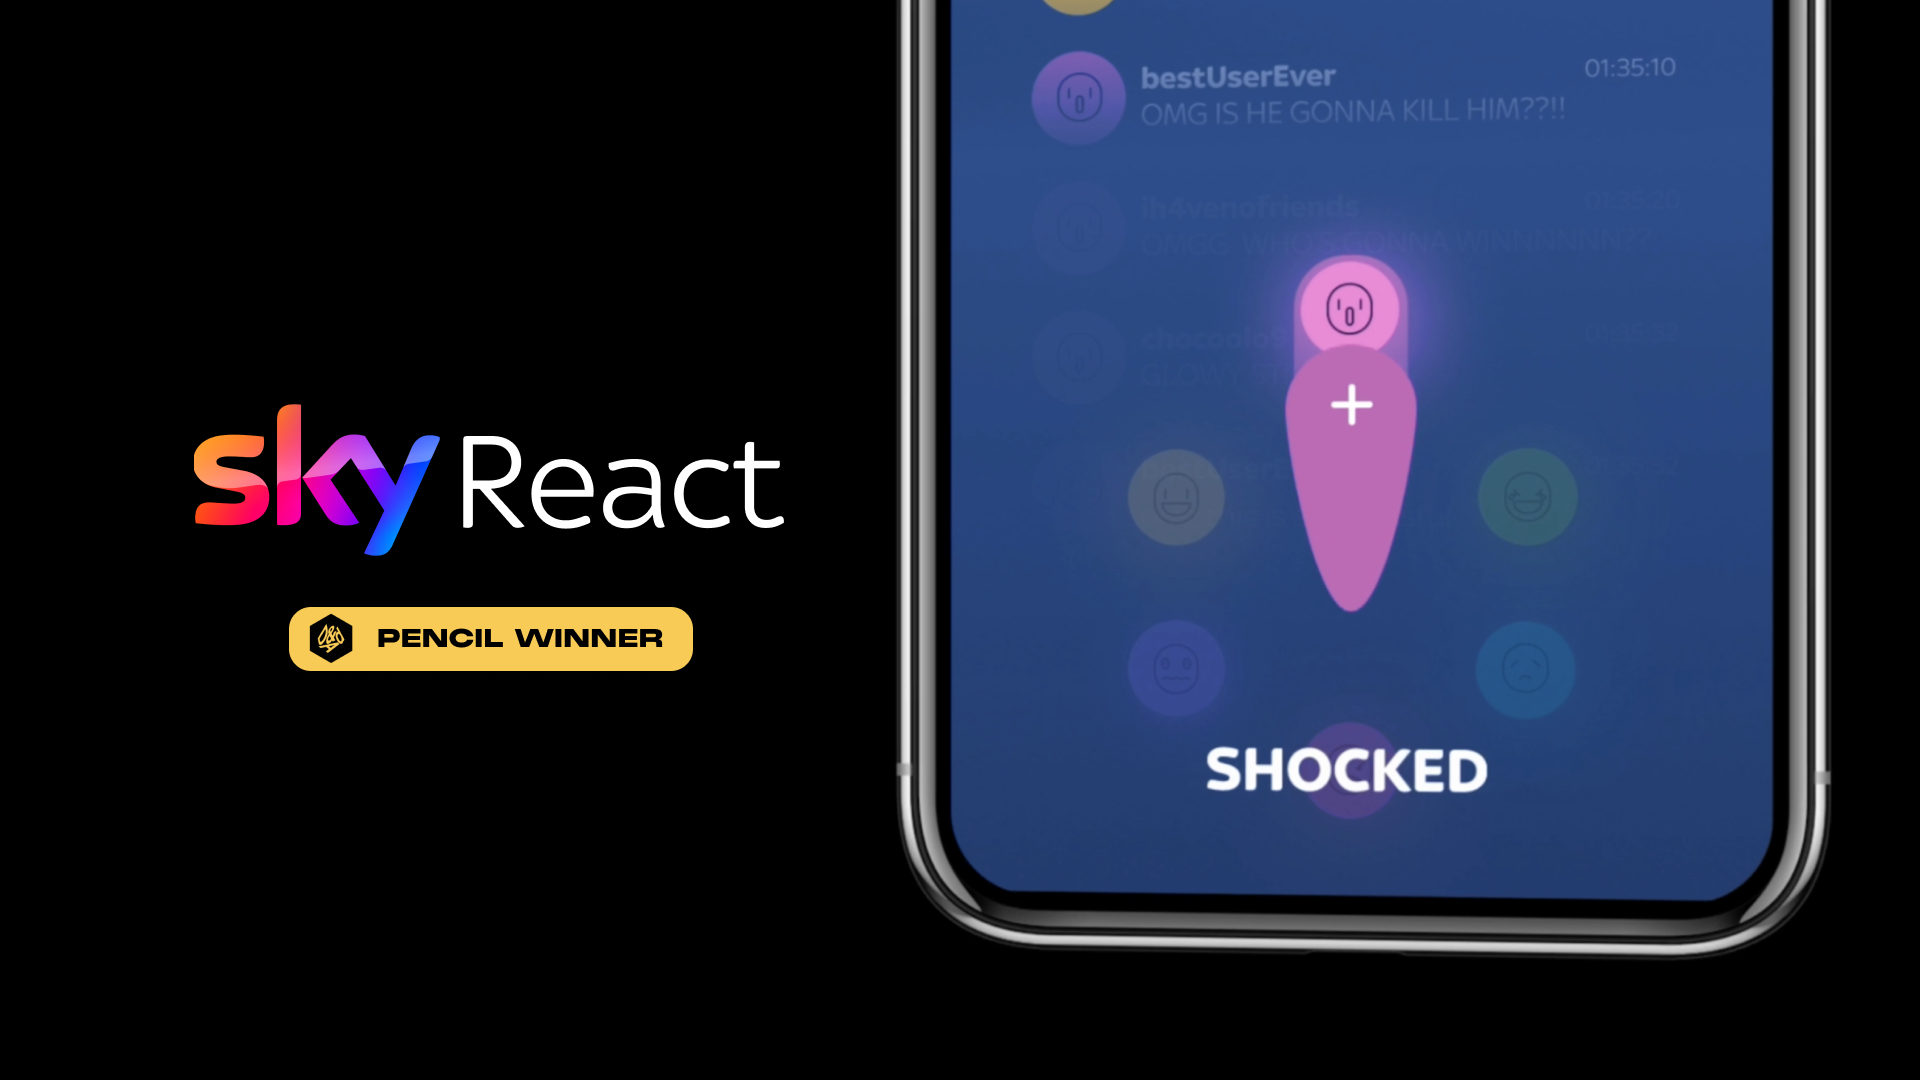 Sky React supporting video. Thumbnail shows sky react logo to left and react design mocked up on a phone to the right.